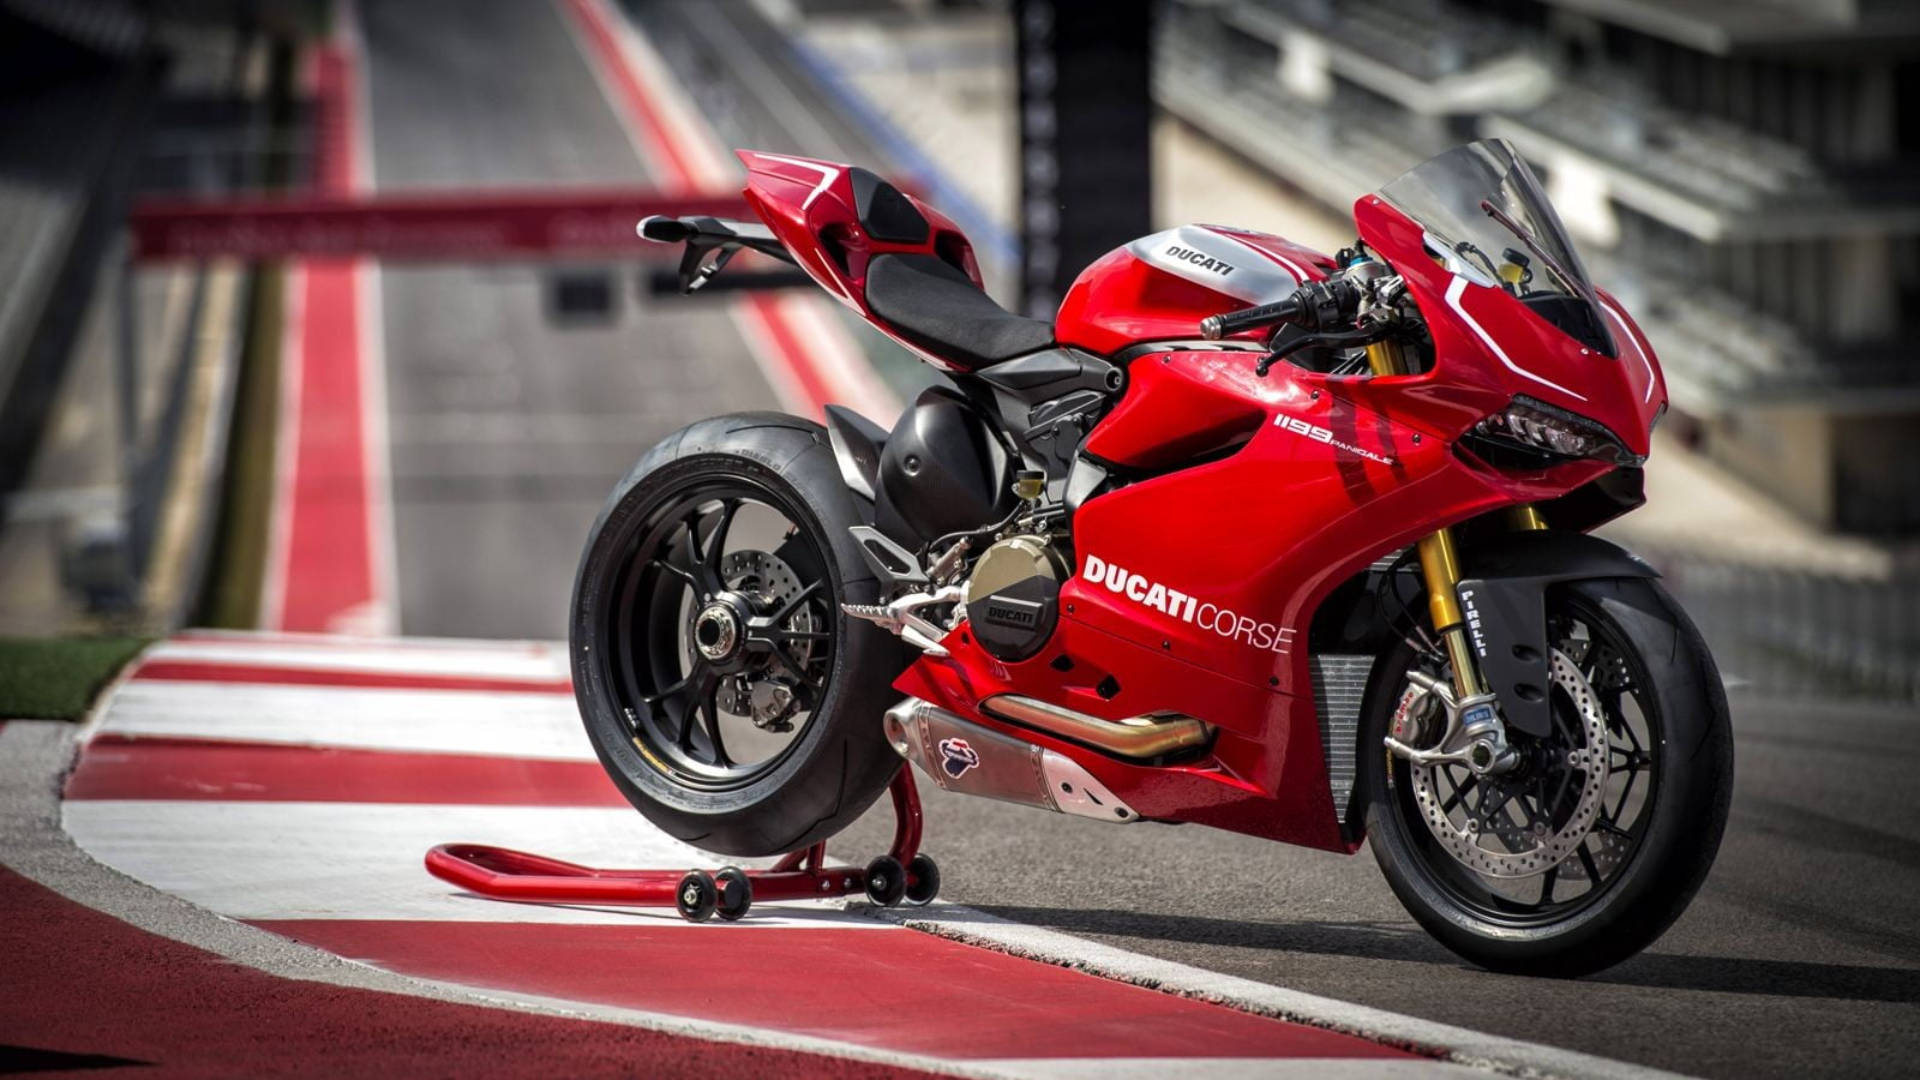 The Bold and Powerful Red Ducati 1199 Panigale R Wallpaper